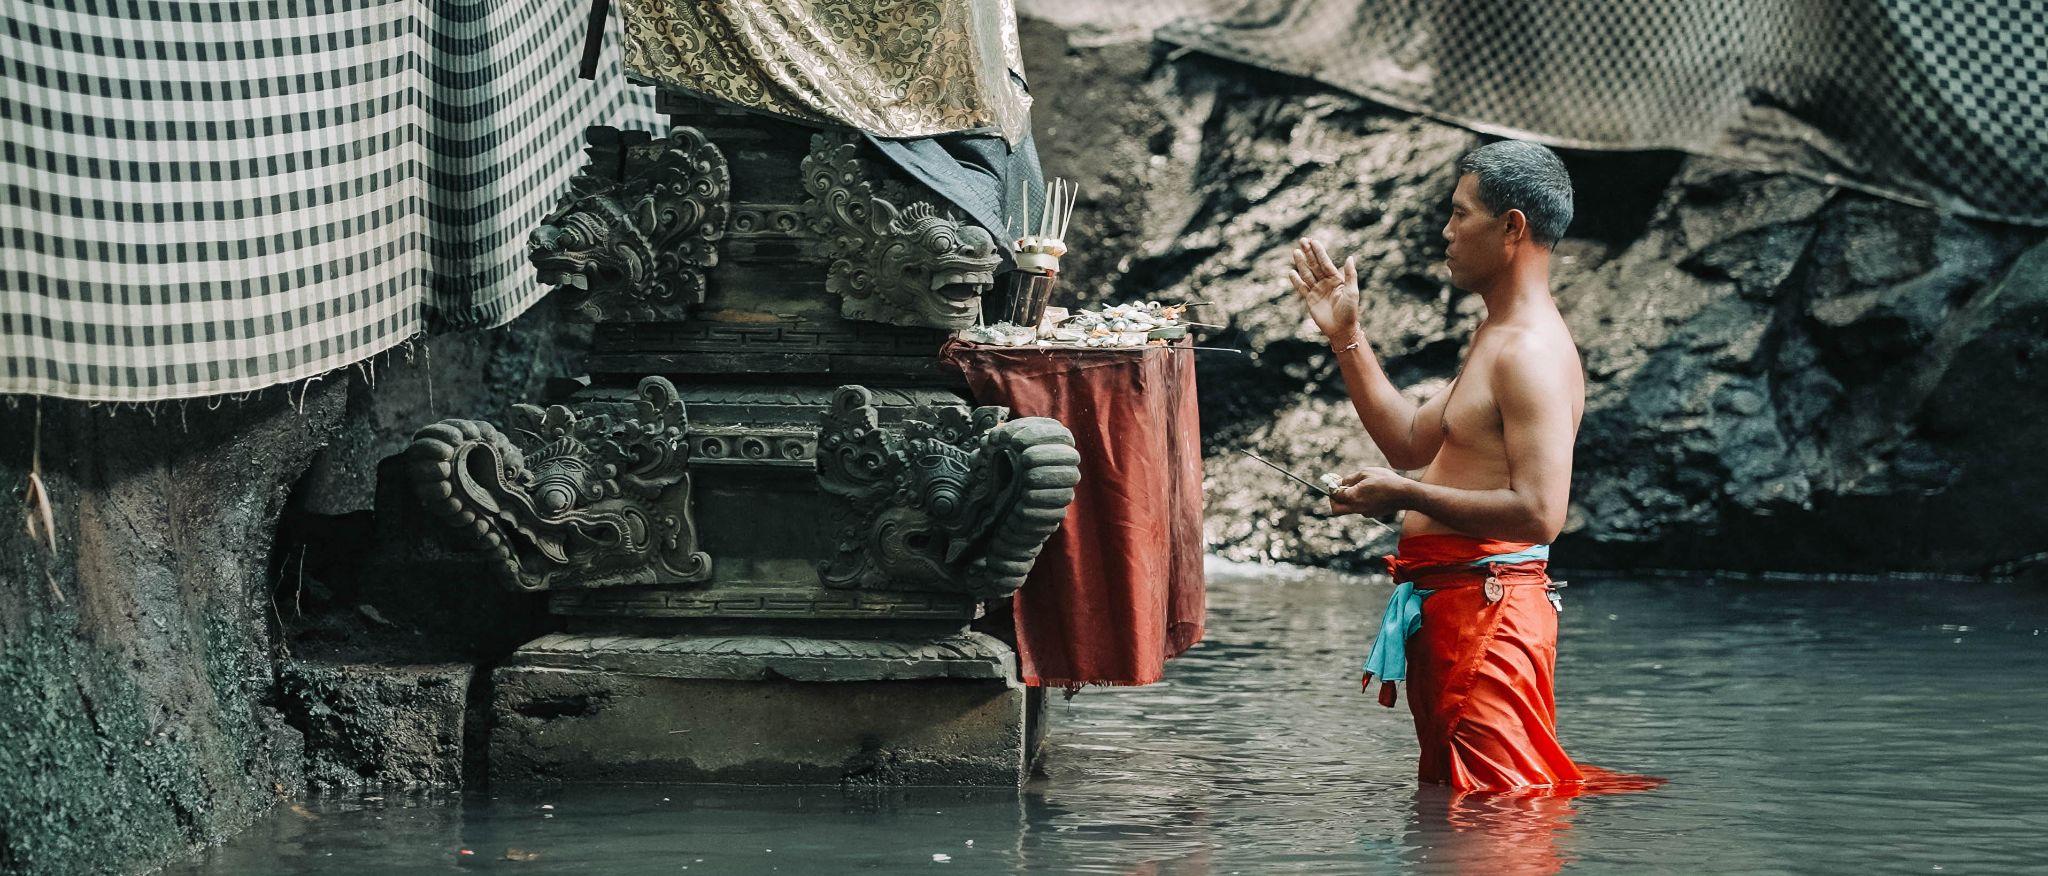 Bali is one of the first ancestral communities to benefit from Quantum Temple’s model for the preservation of heritage for future generations through 